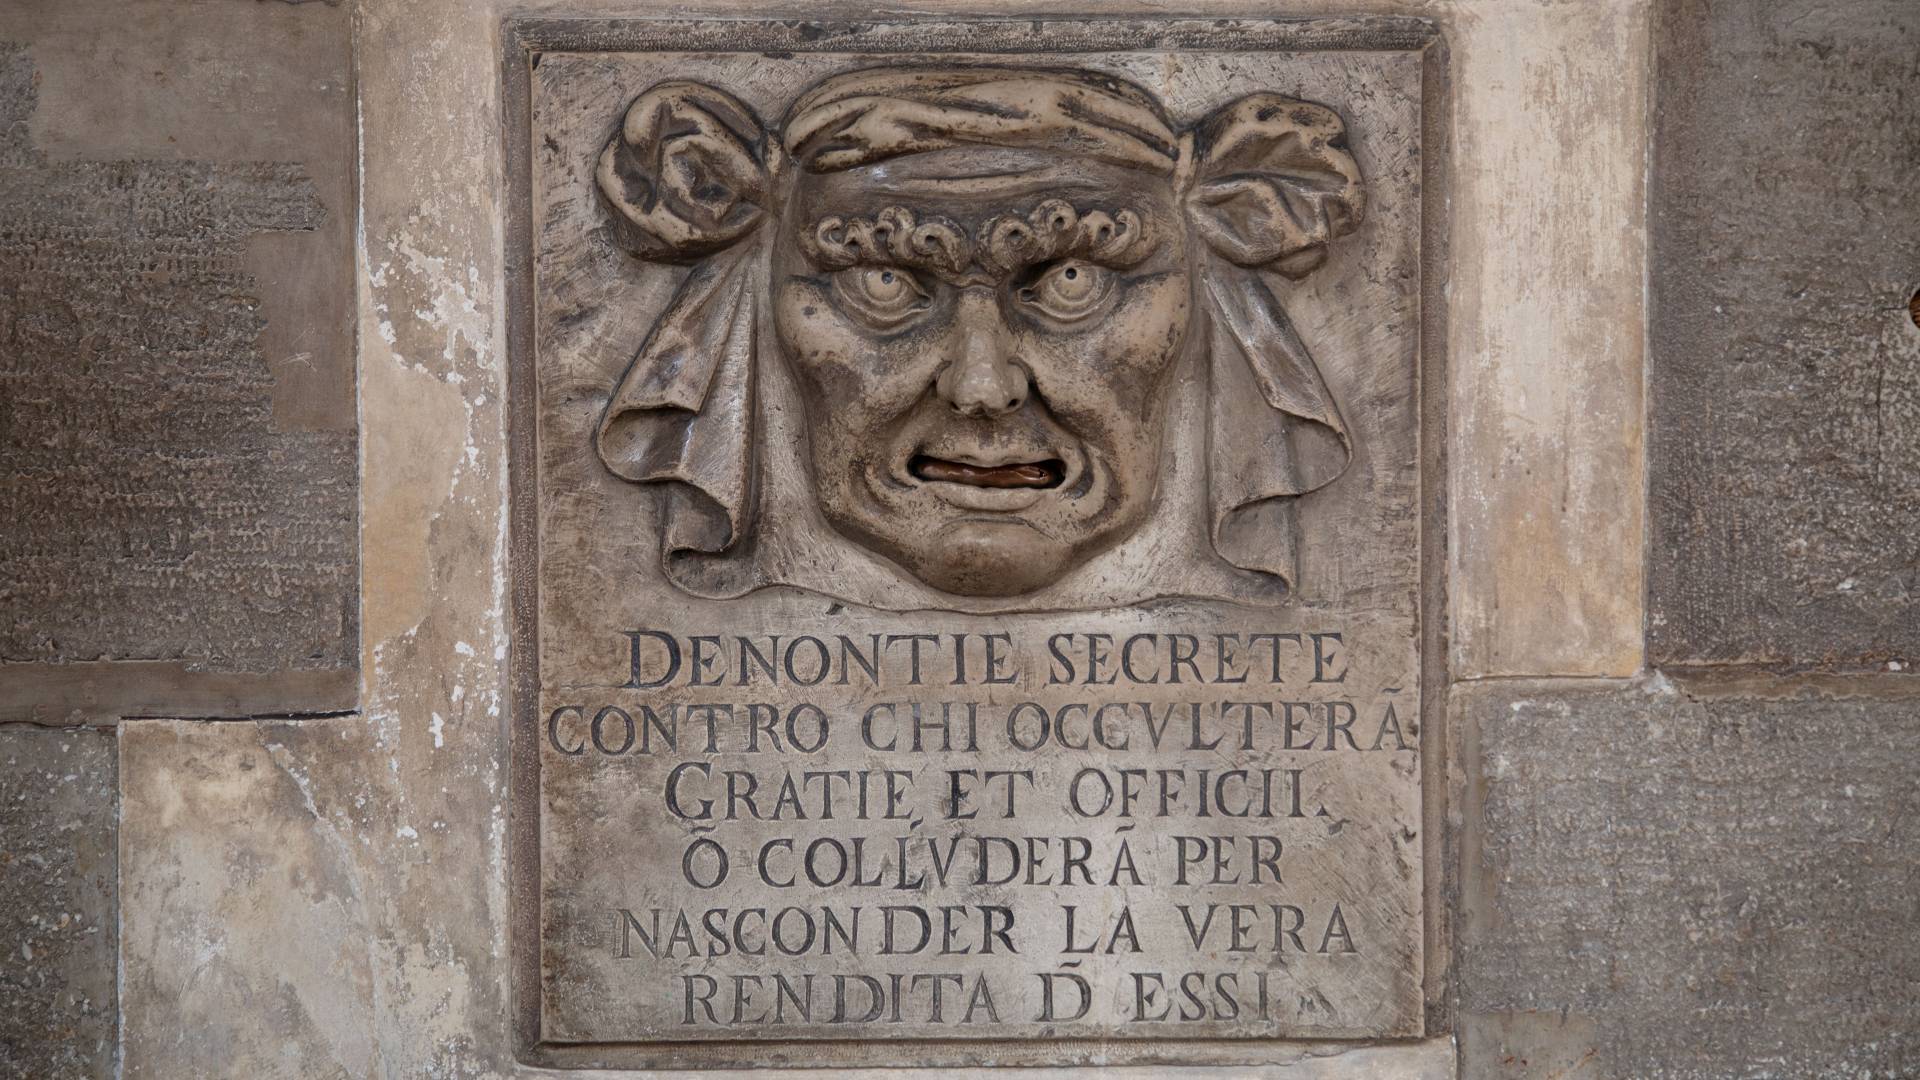 Detail of face on wall of Doge's Palace in Venice